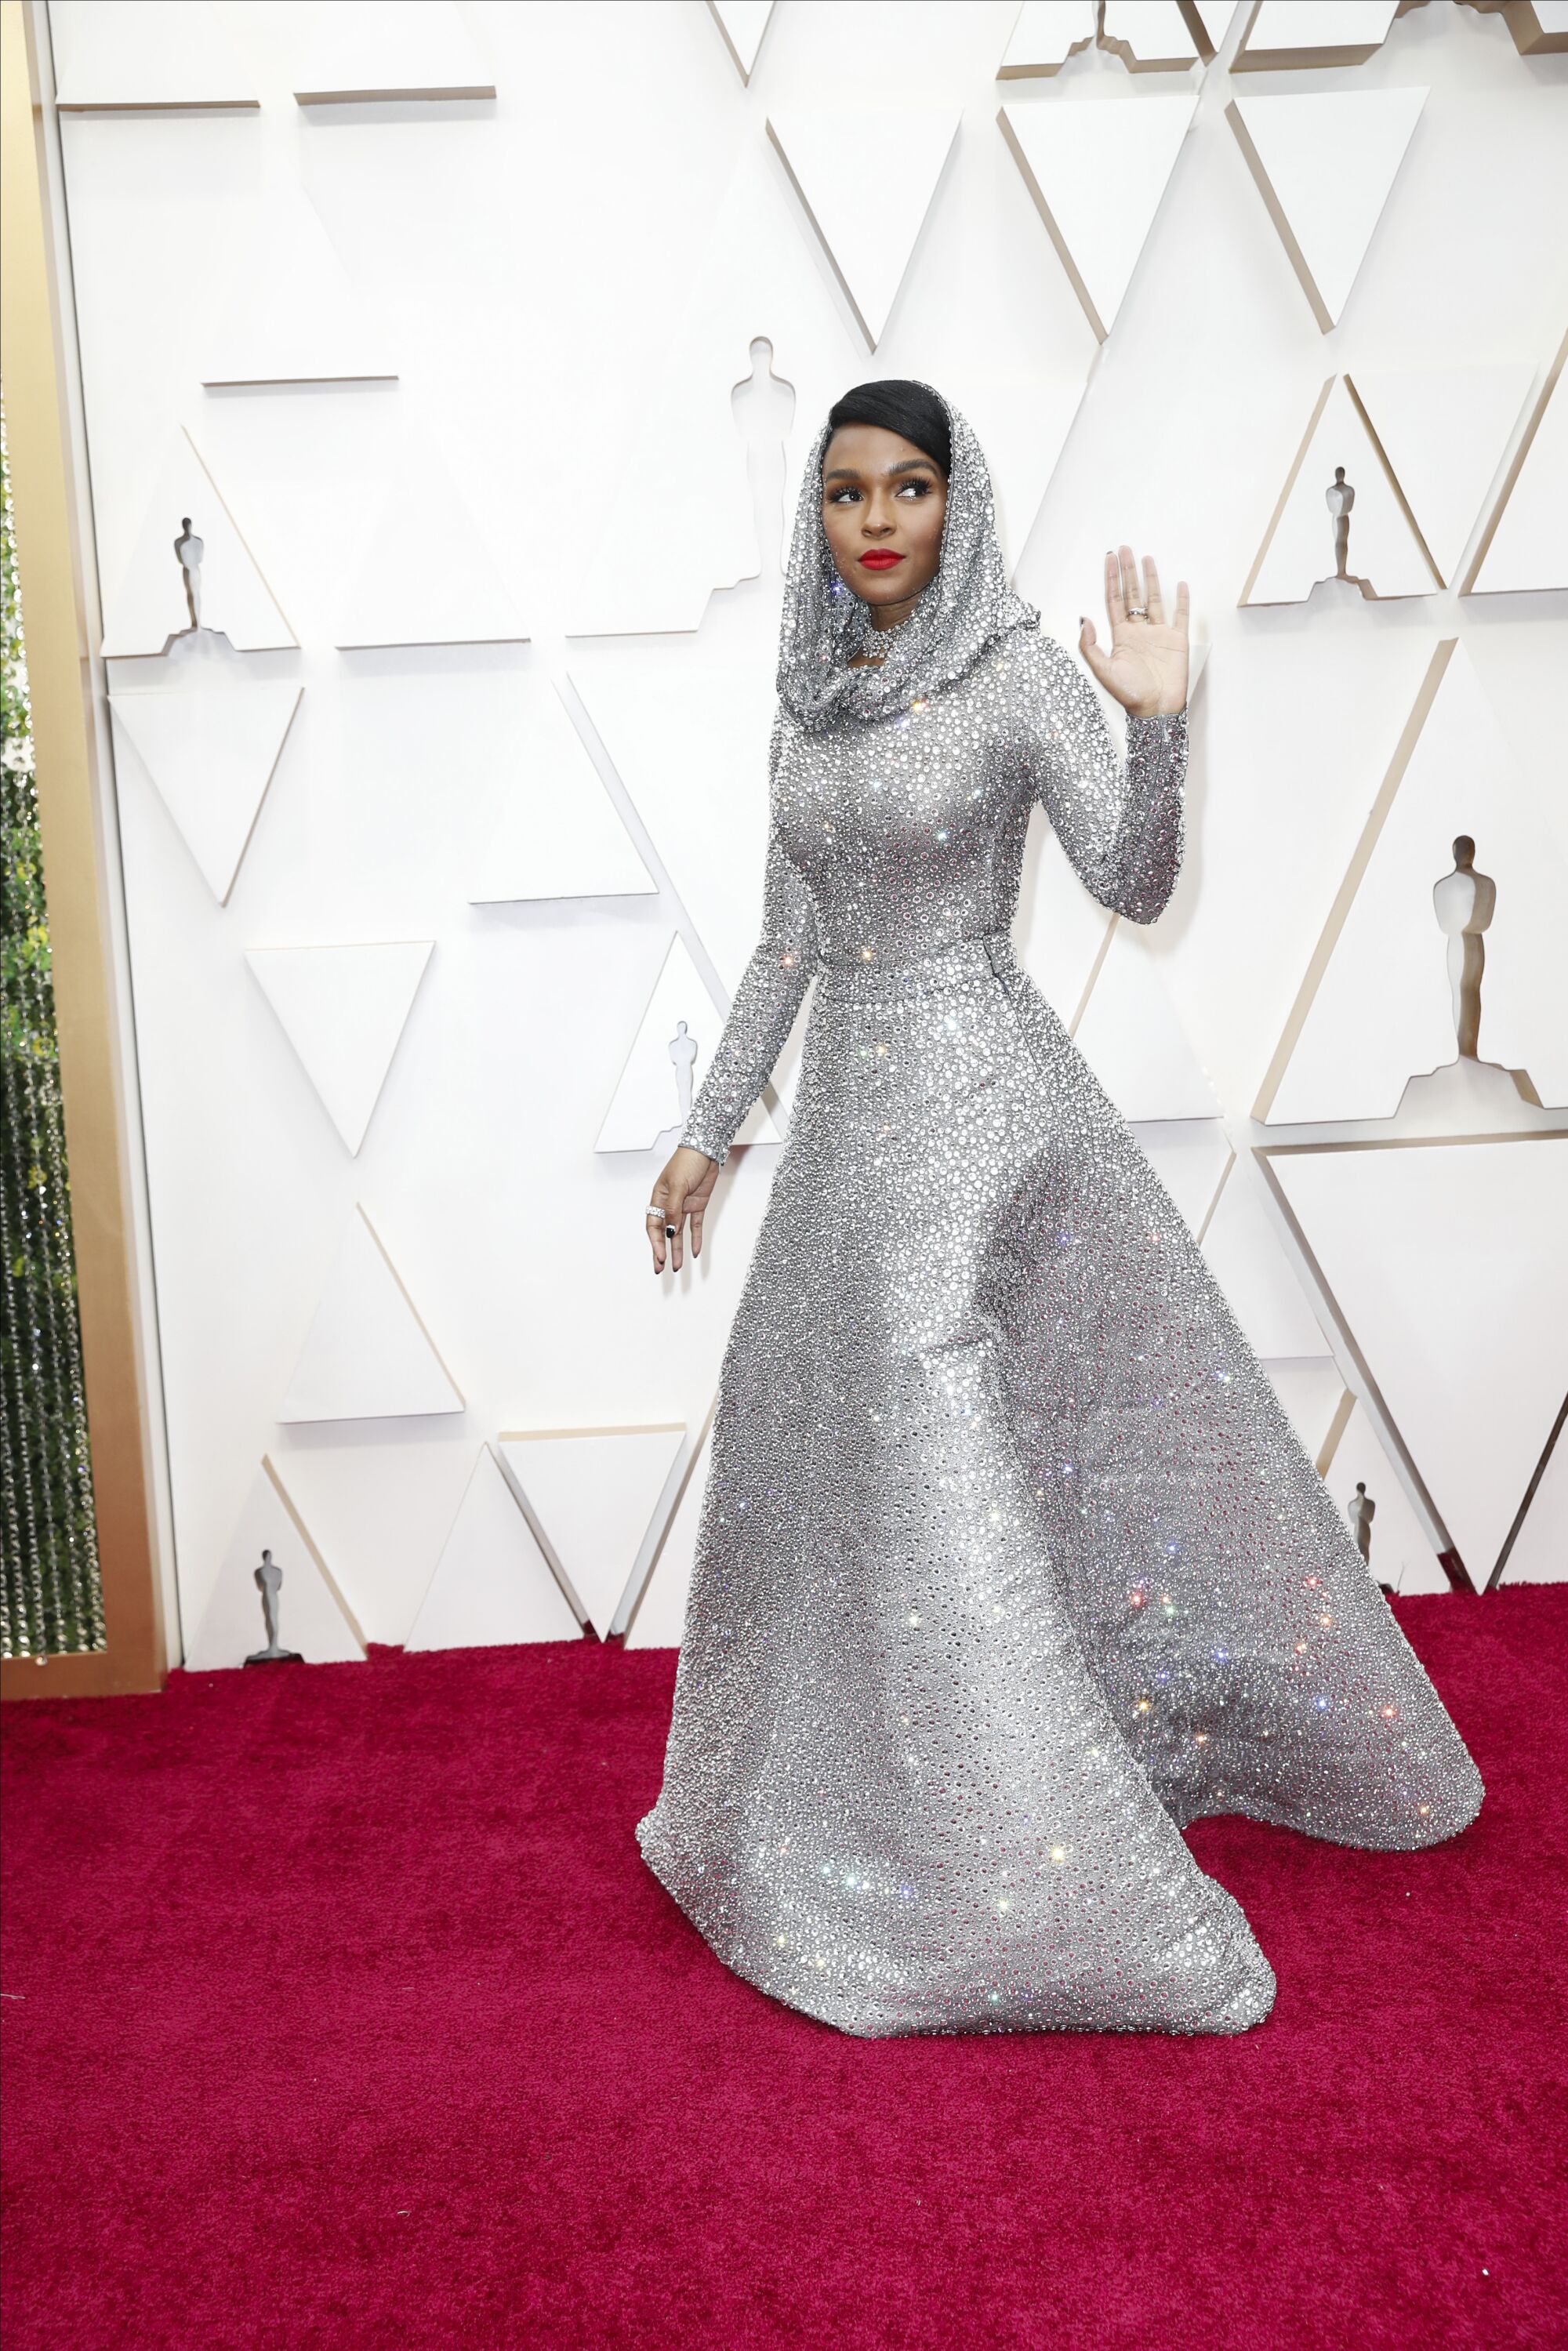 Janelle Monáe waves to the crowd as she arrives at the Academy Awards in   2020.